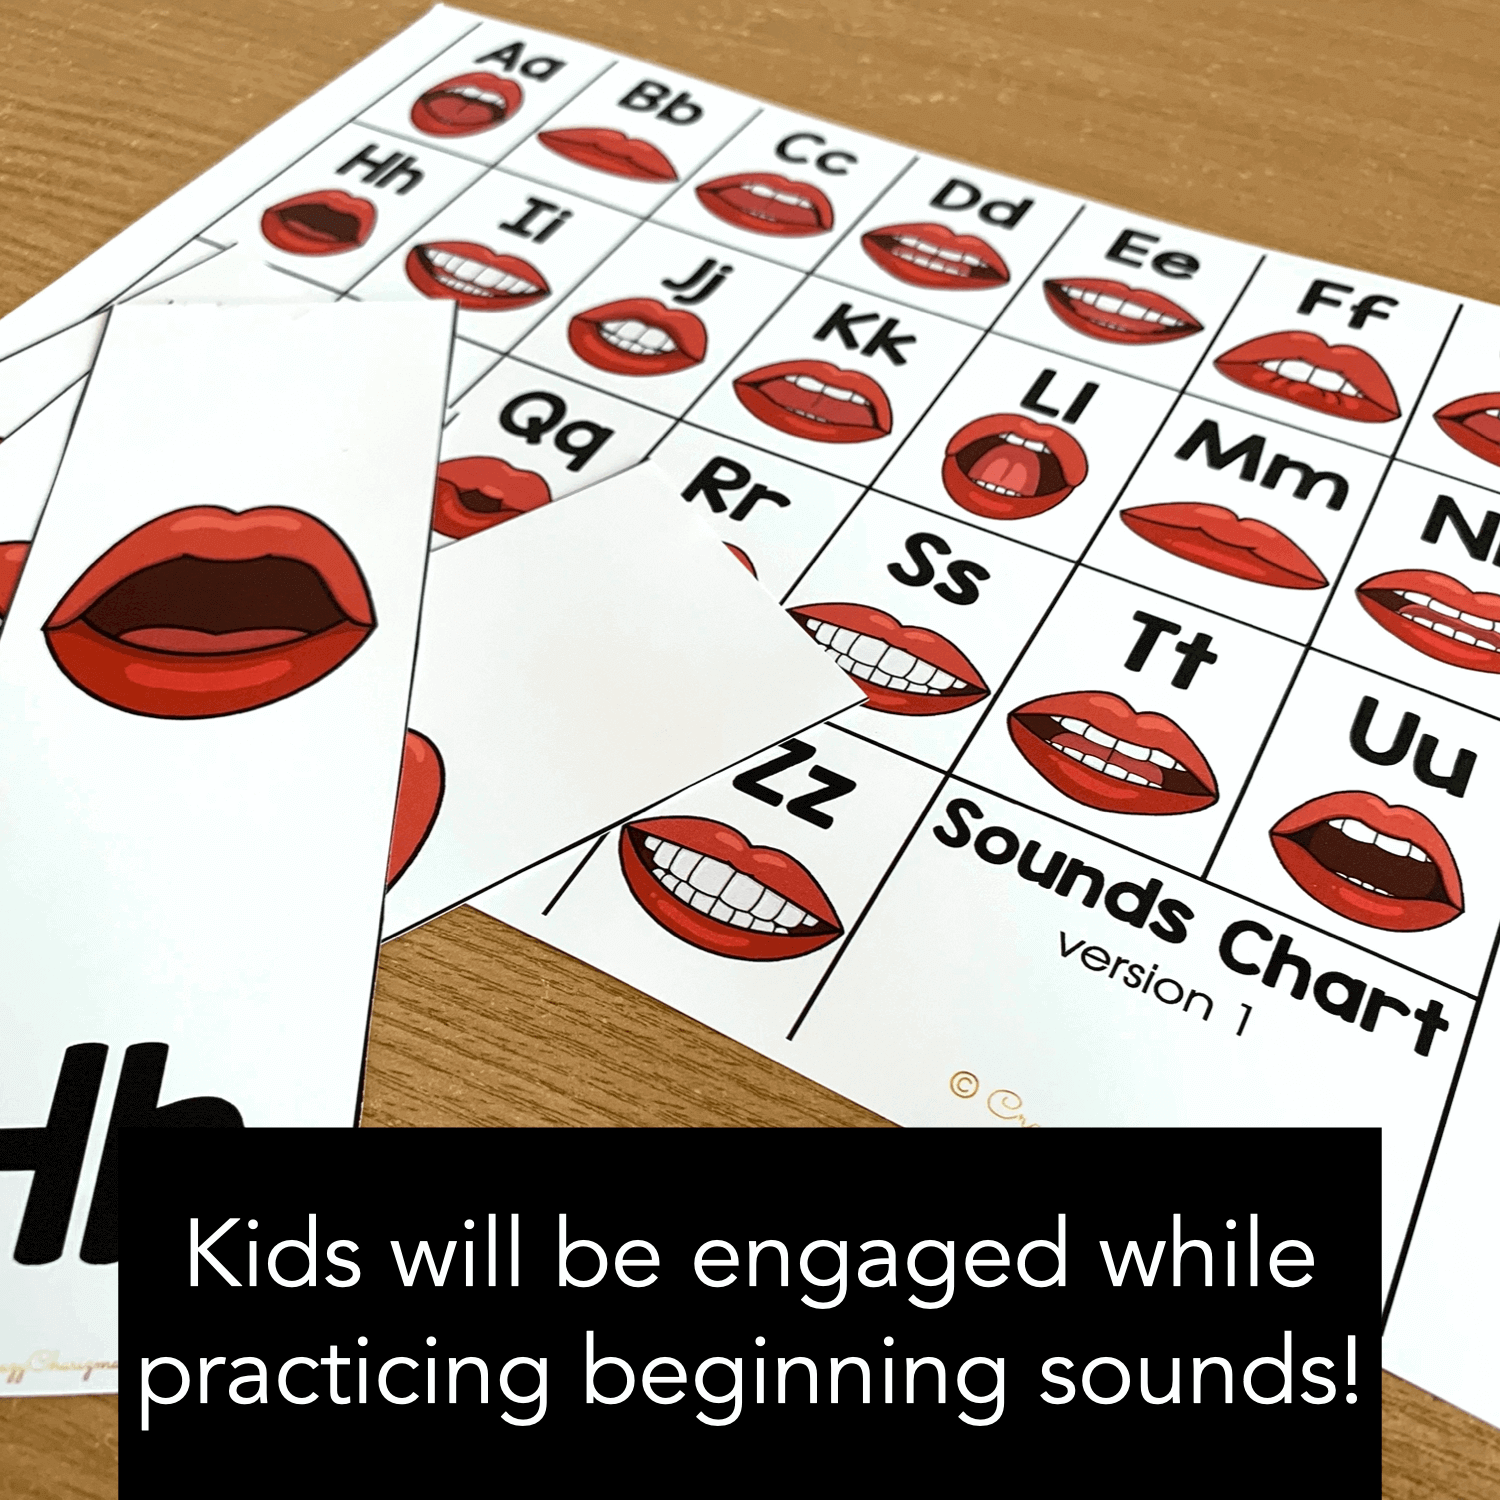 Mouth Pictures Speech Sounds Beginning Sounds Chart - resource in action photo 3